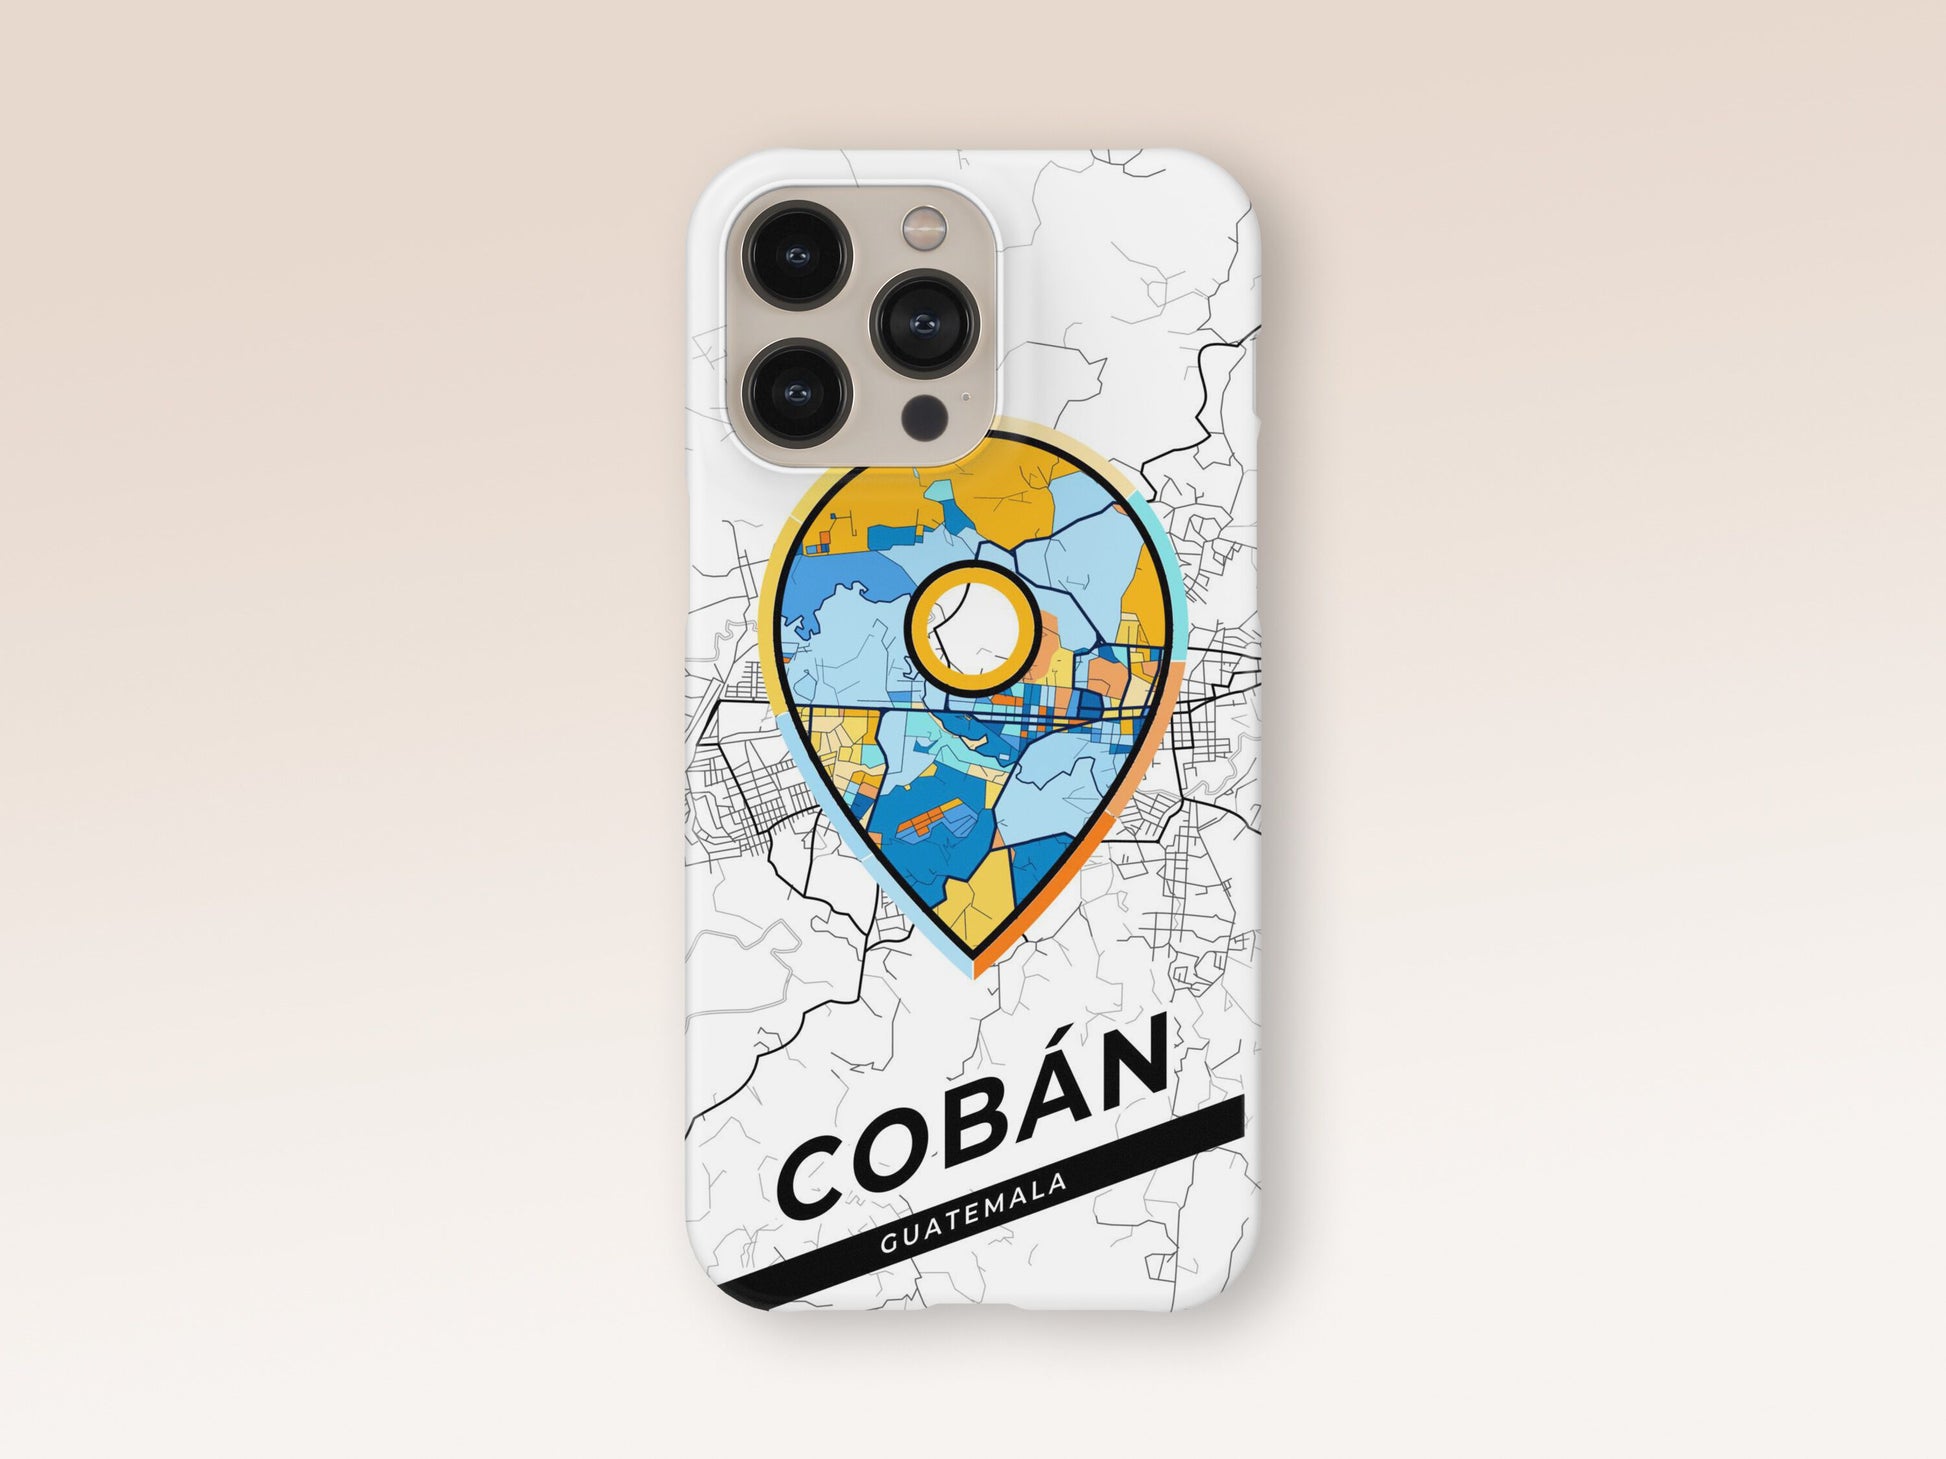 Cobán Guatemala slim phone case with colorful icon. Birthday, wedding or housewarming gift. Couple match cases. 1